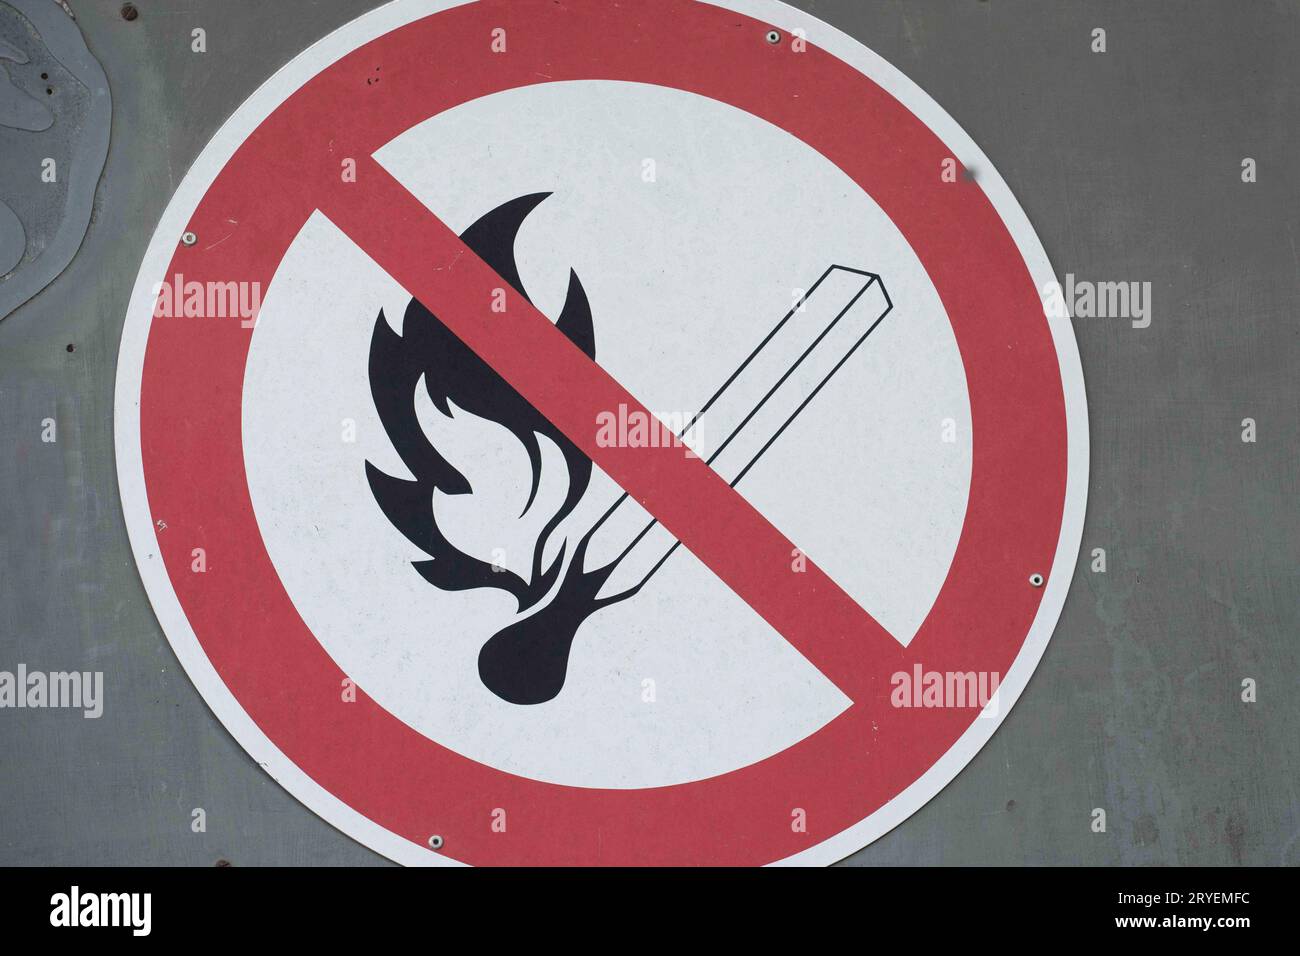 A open fire prohibited sign Stock Photo